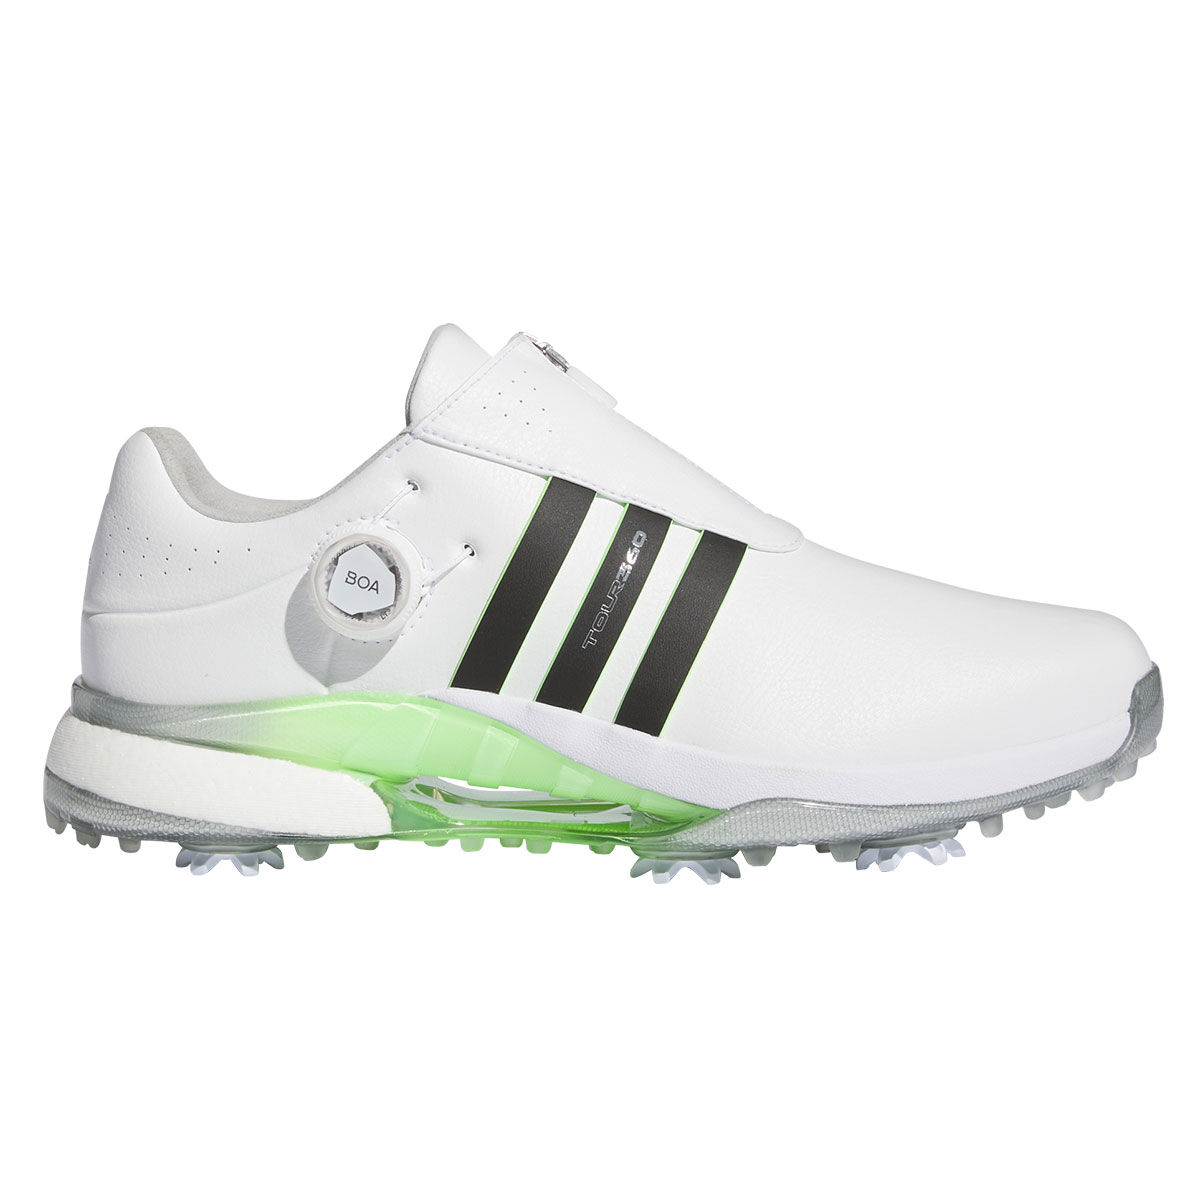 adidas Men’s Tour360 24 BOA Boost Waterproof Spiked Golf Shoes, Mens, White/core black/green spark, 7 | American Golf